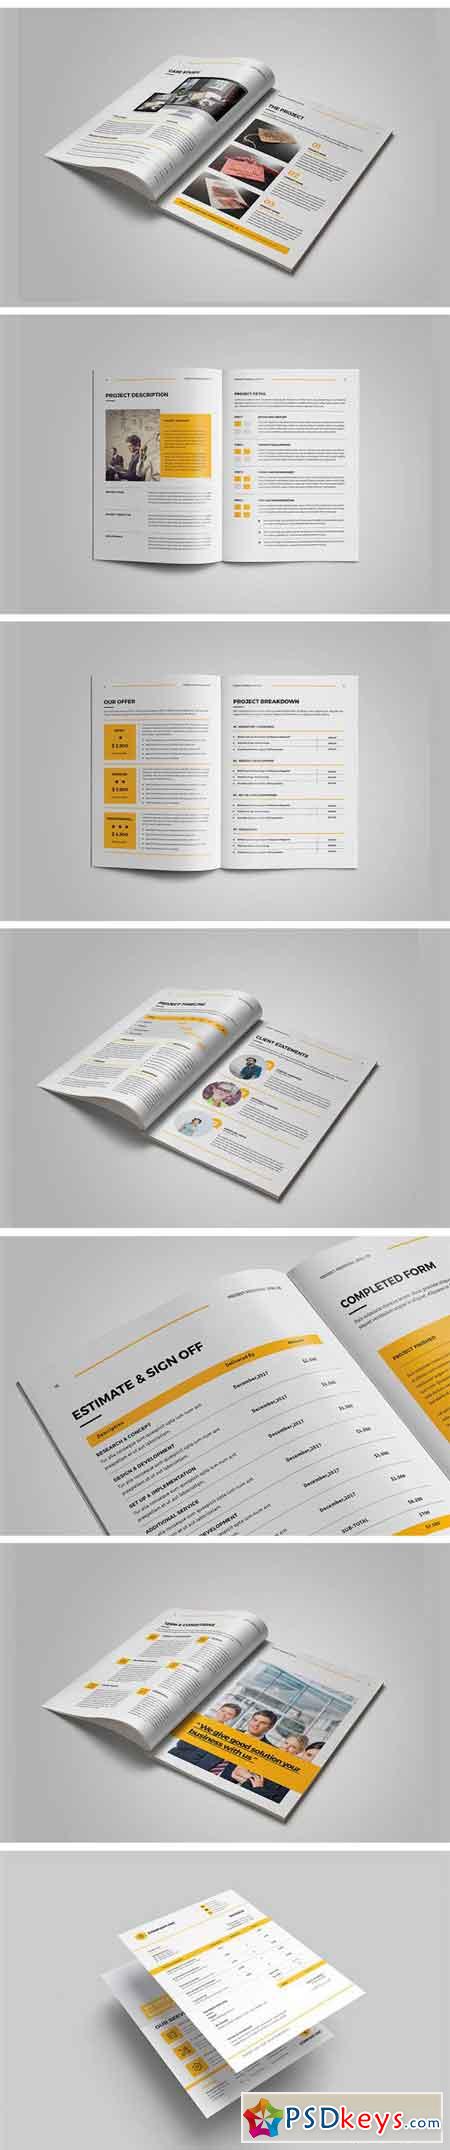 Graphicriver creative project proposal 9563949 download free download